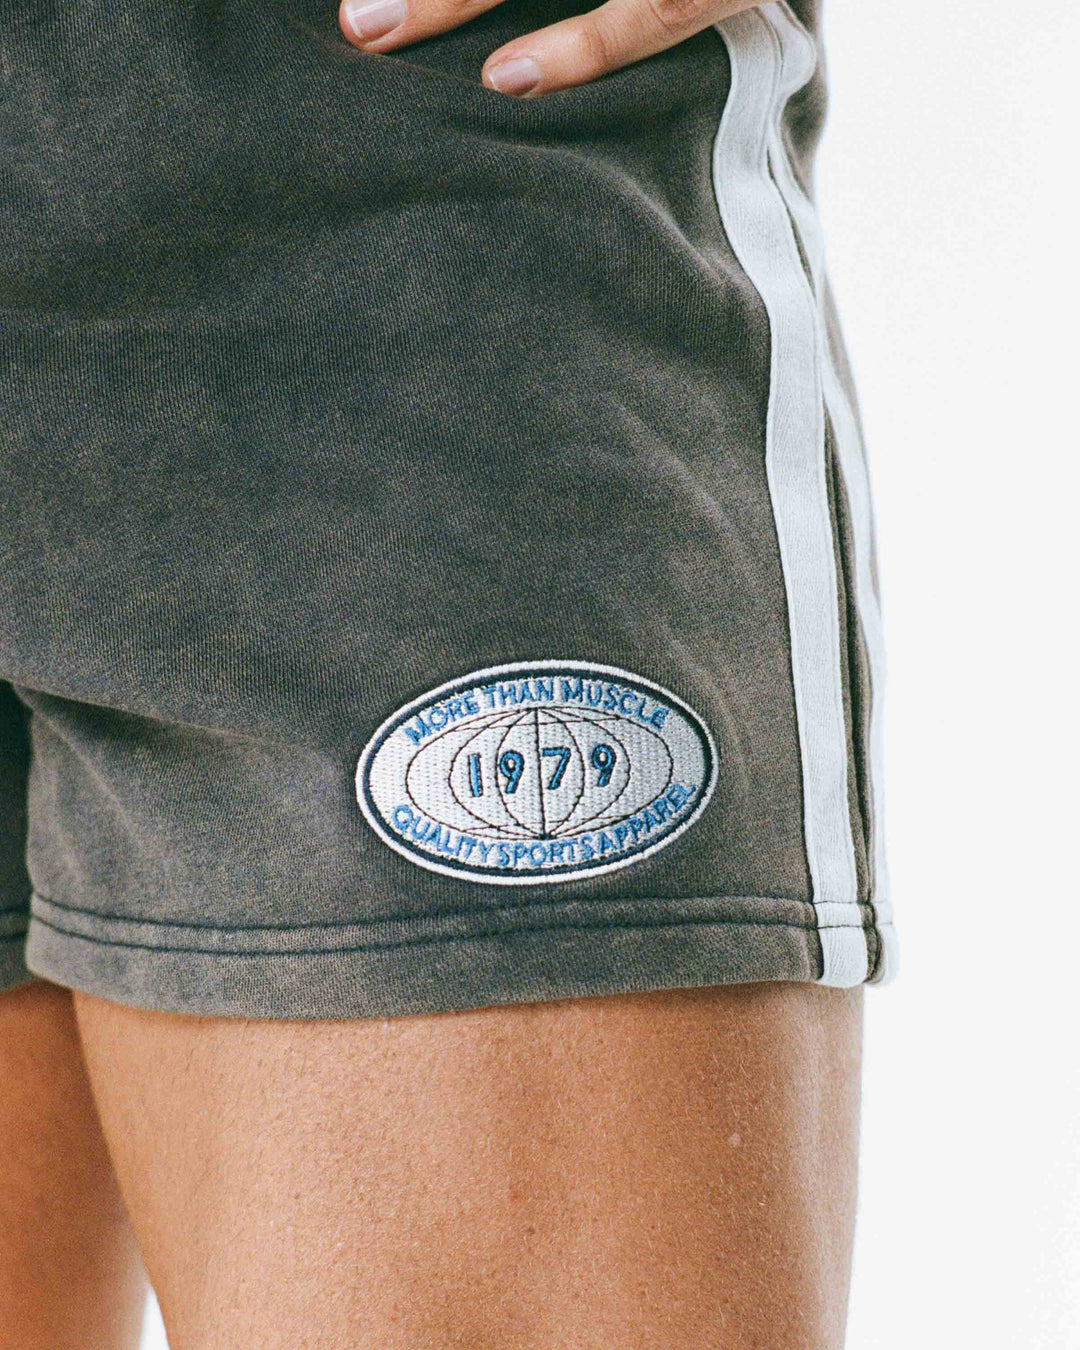 Vintage Cotton Shorts - Faded Navy